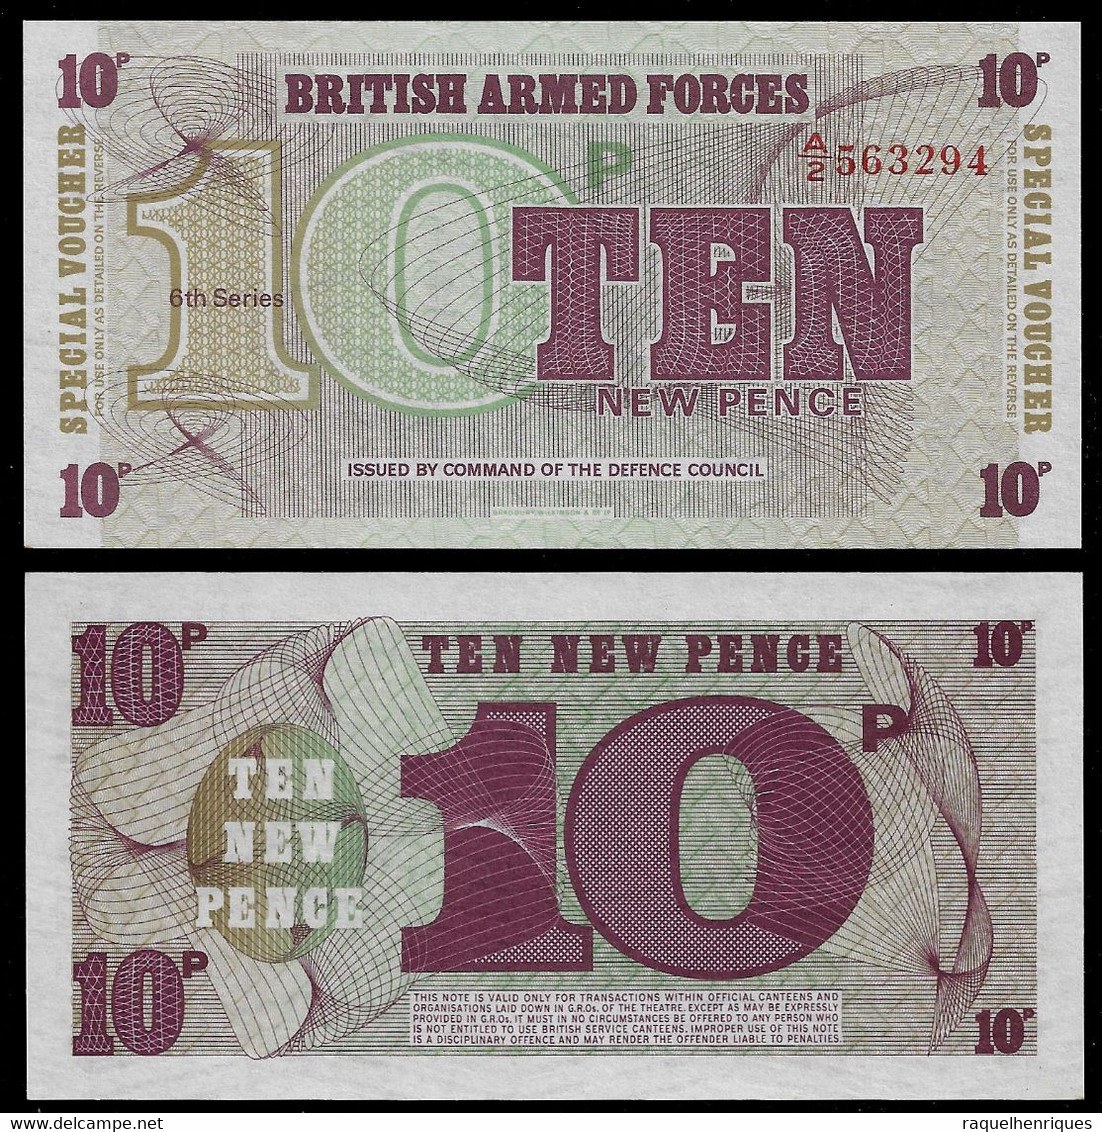 UNITED KINGDOM - BRITISH ARMED FORCES BANKNOTE - 10 NEW PENCE UNC (NT#02) - British Armed Forces & Special Vouchers